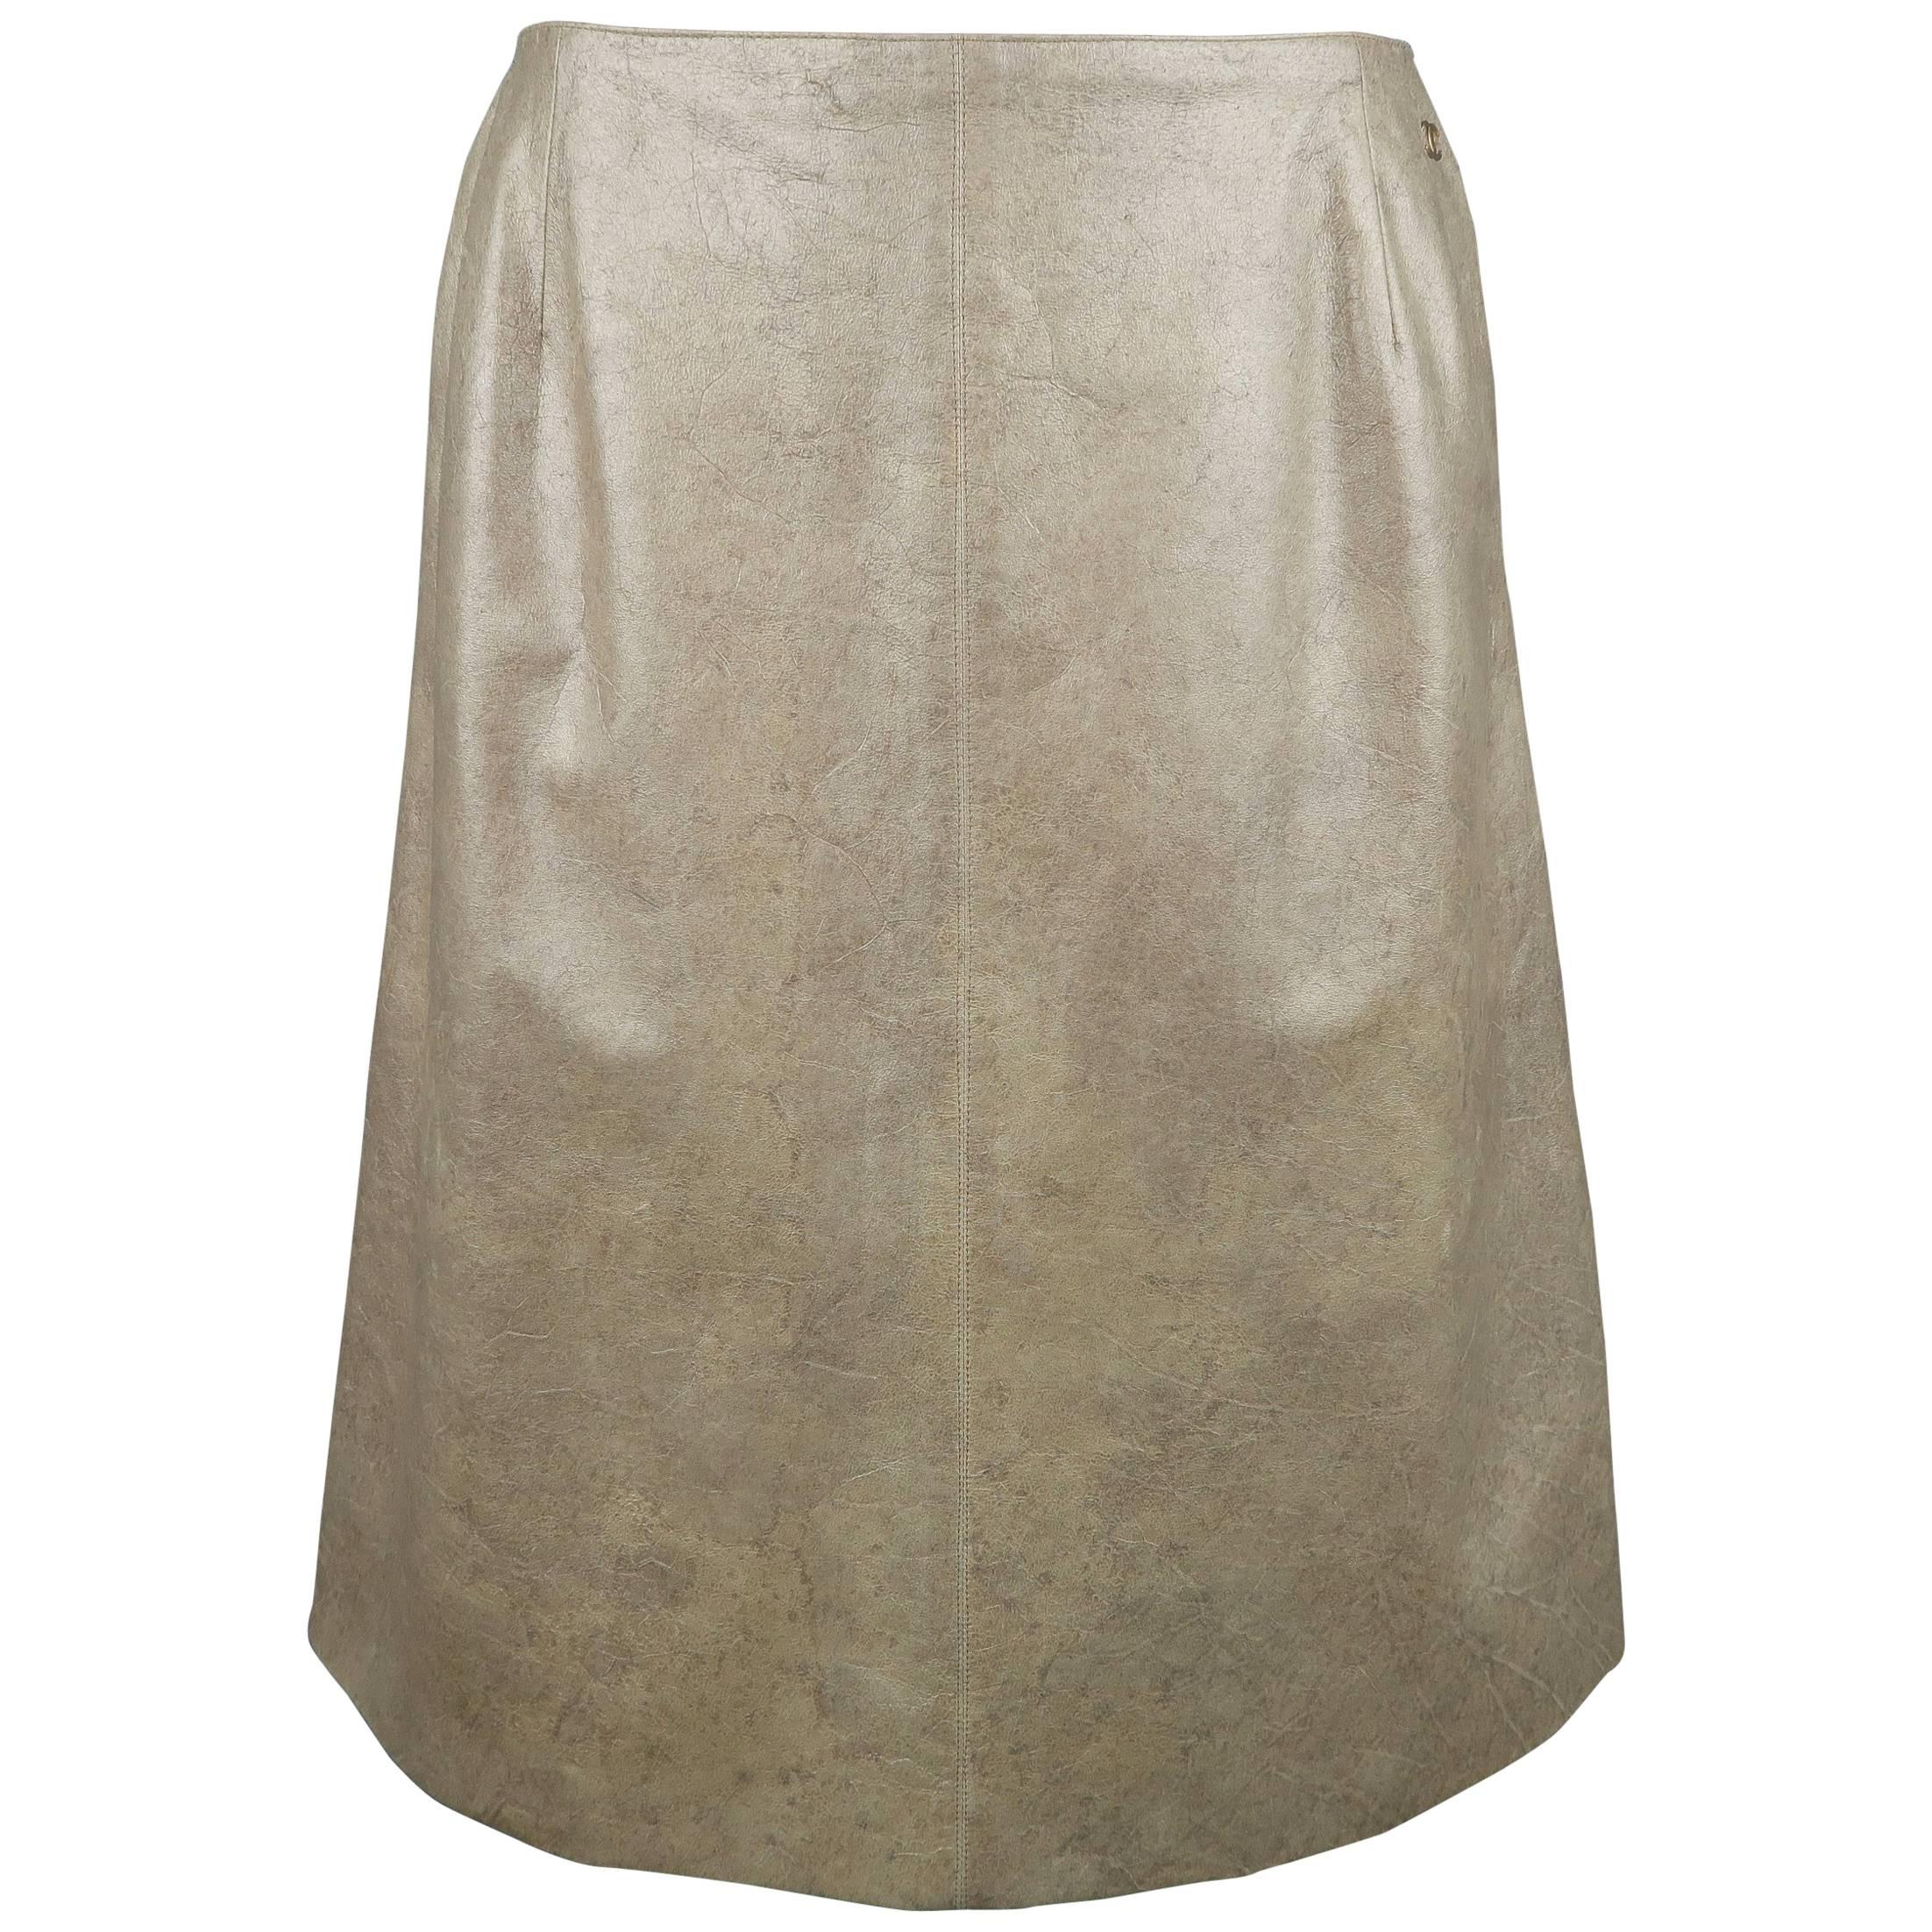 Chanel Skirt - Vintage, Metallic Gold, Marbled, Leather, A Line, CC